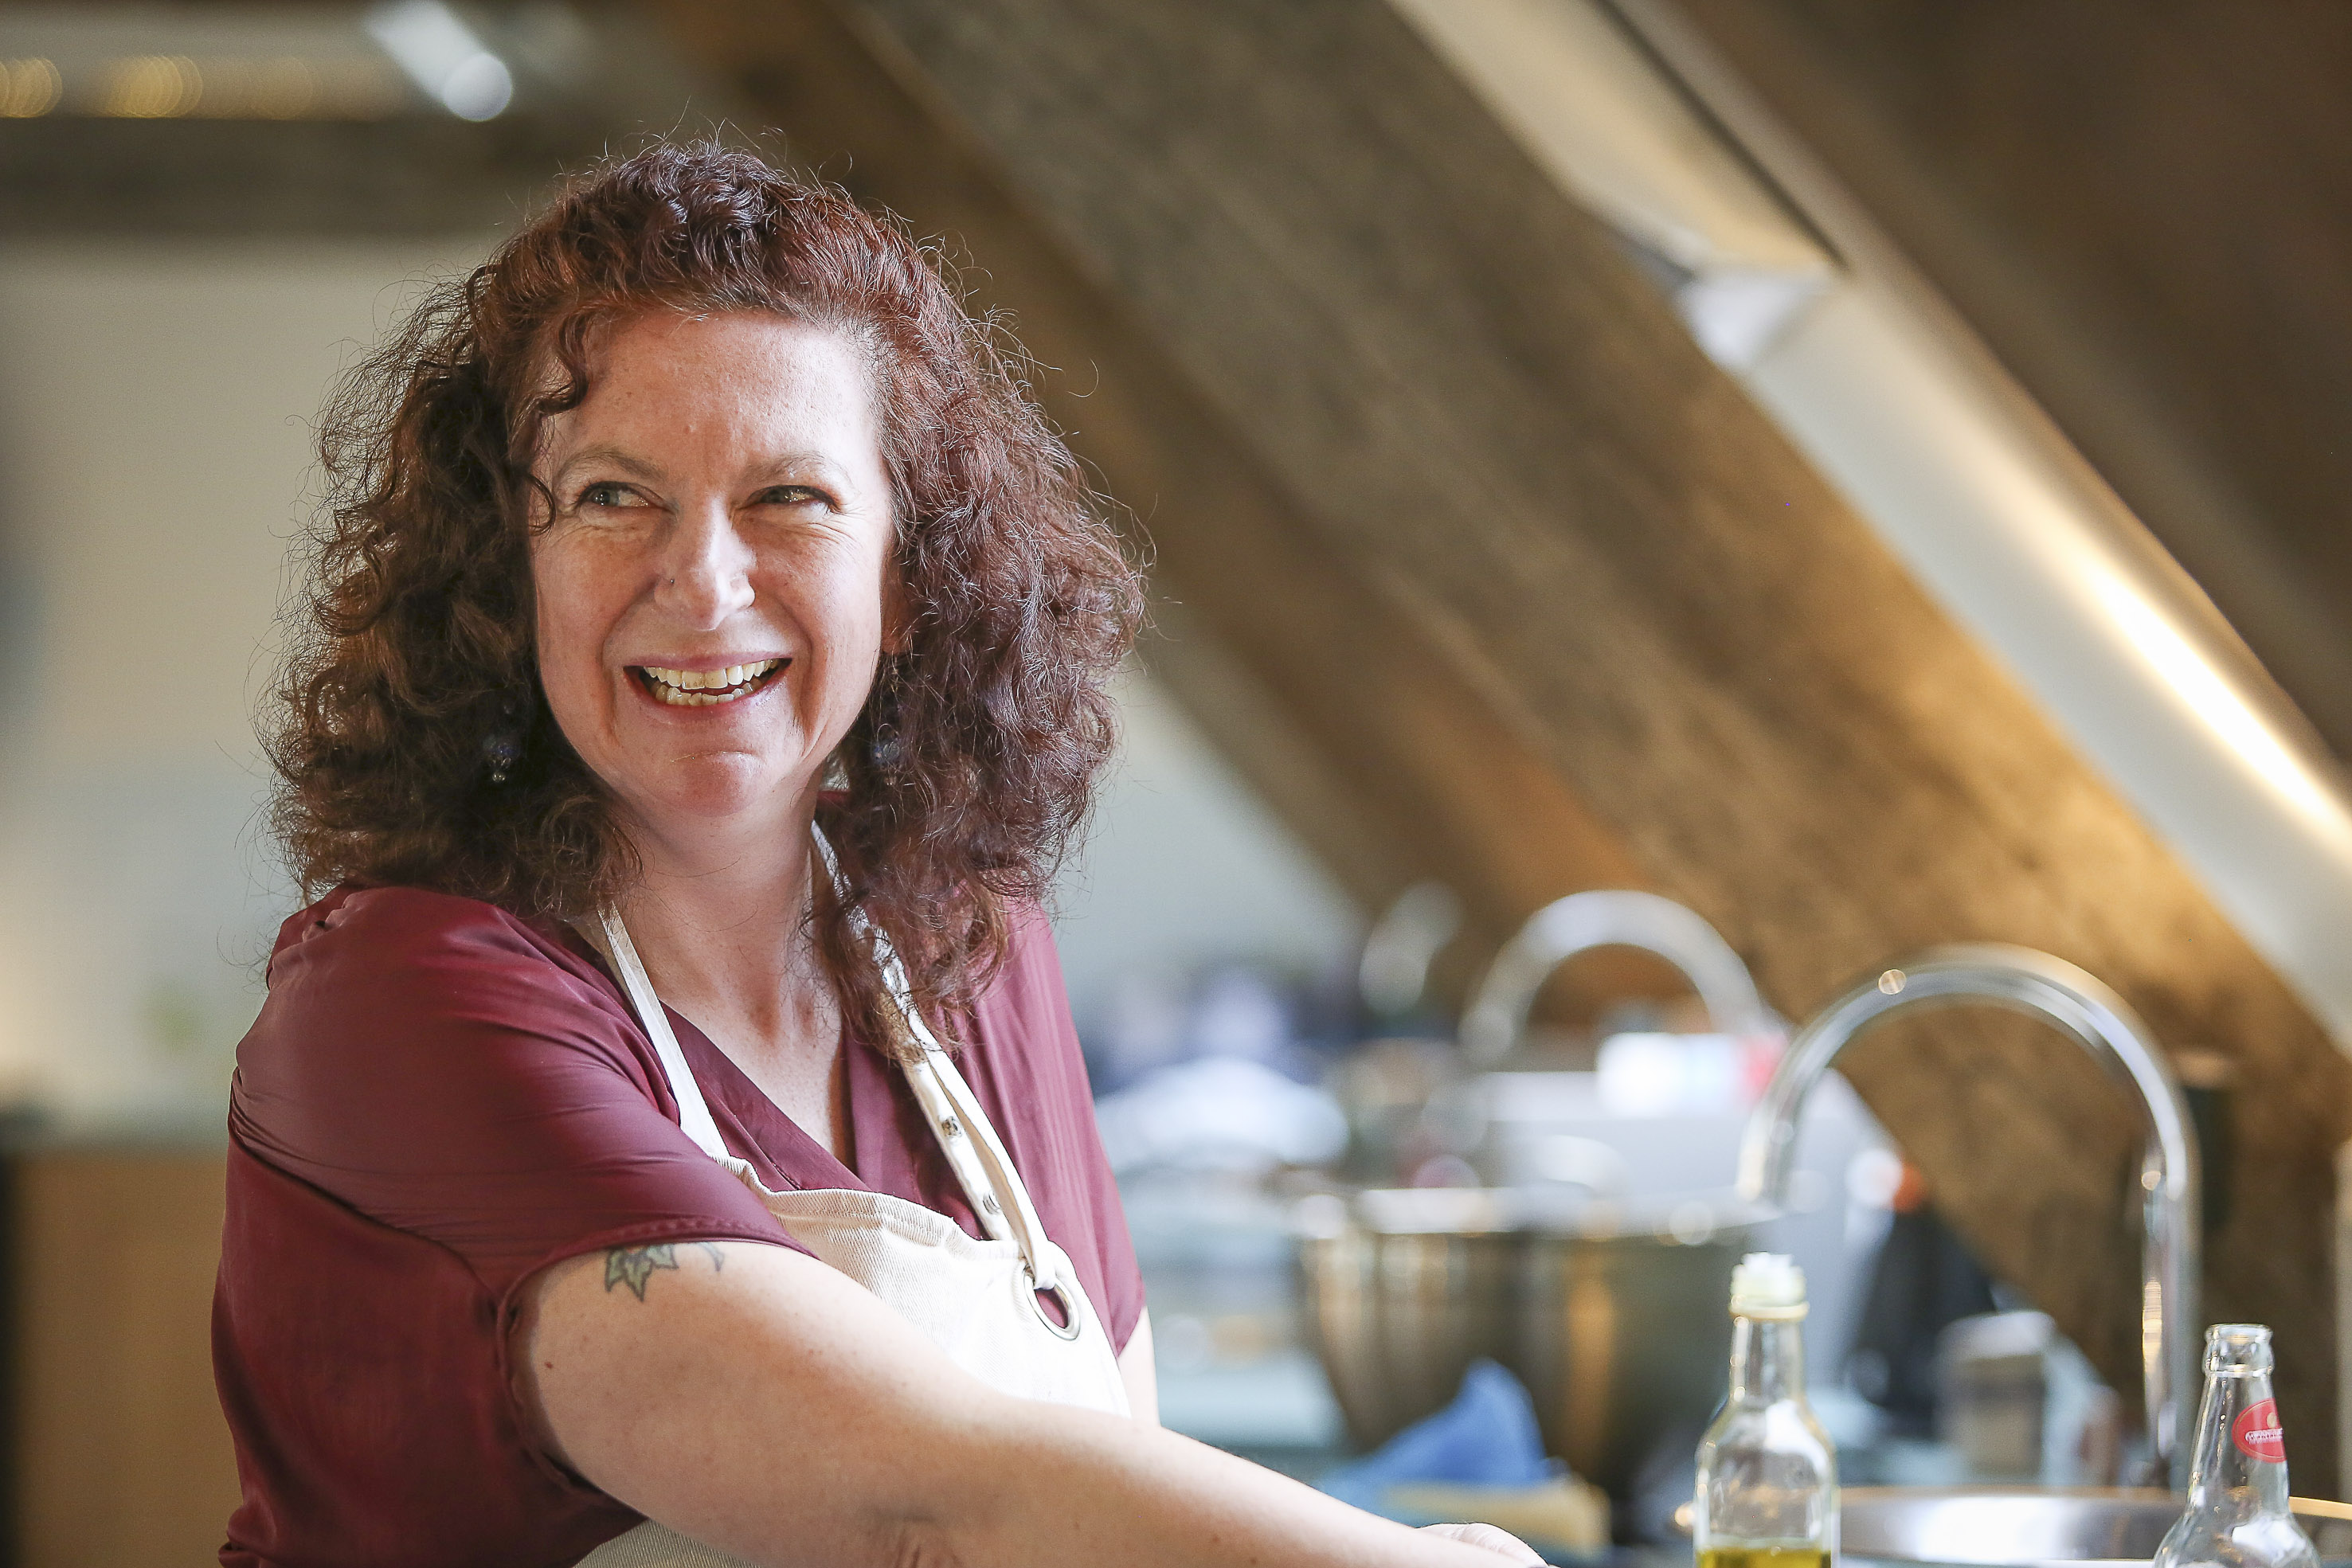 Food, glorious food as kitchen queen Denise rescues ingredients from landfill